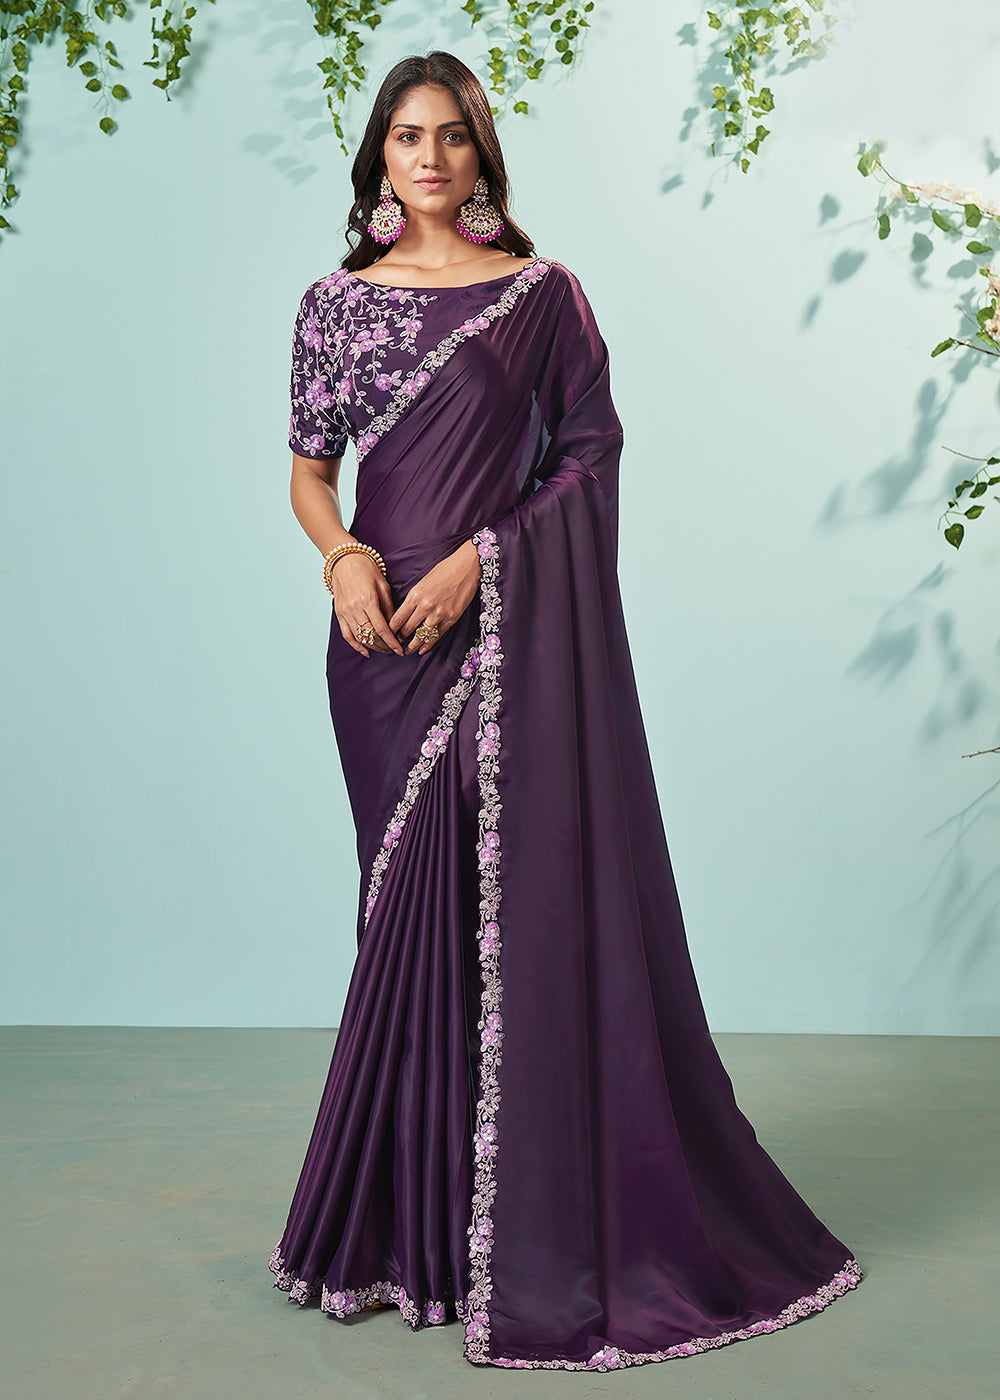 Buy Now Pretty Wine Silk Crepe Embroidered Designer Saree Online in USA, UK, Canada & Worldwide at Empress Clothing. 